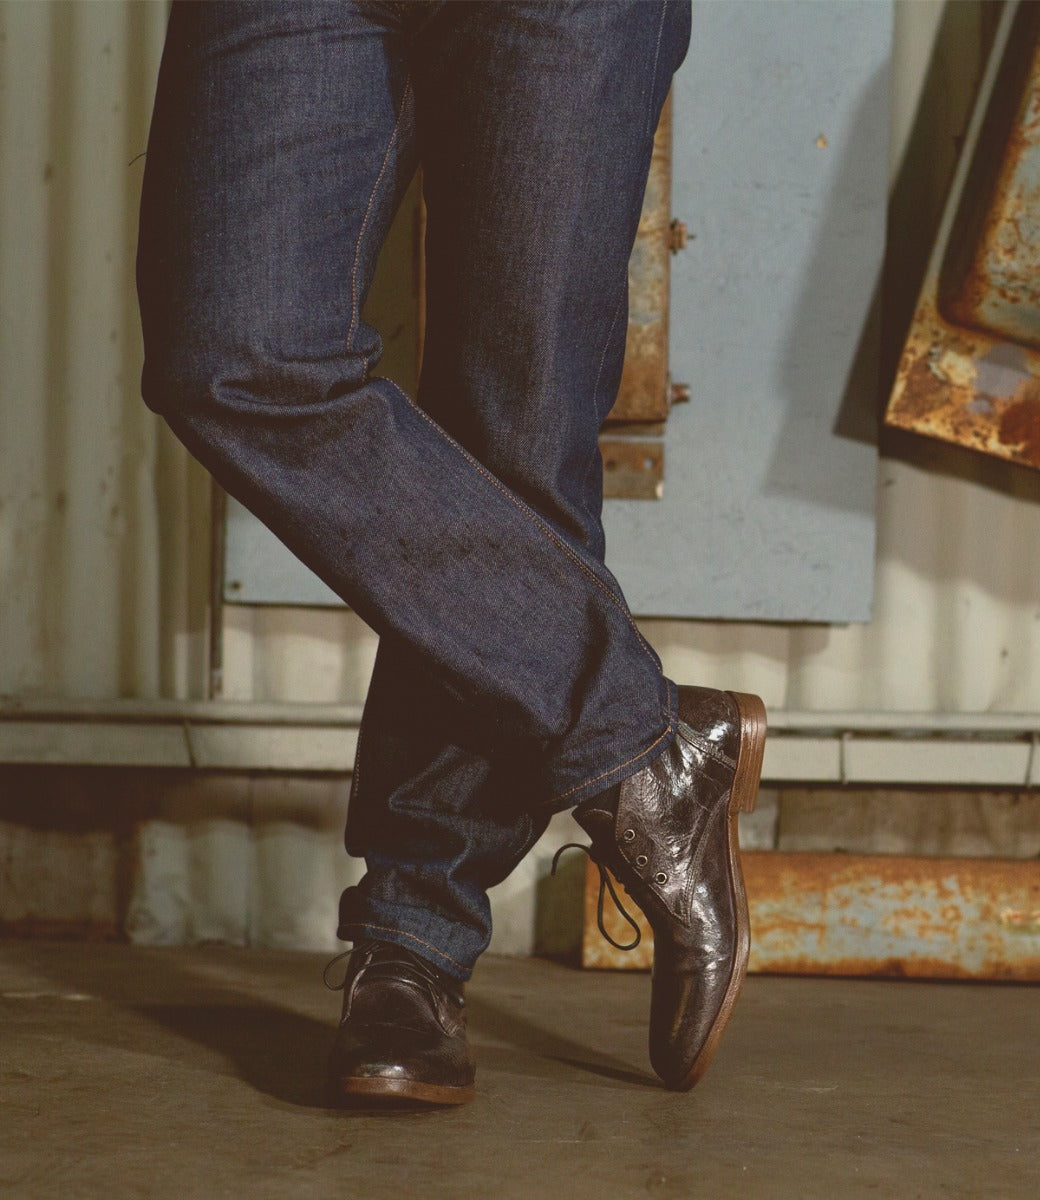 Close-up of a person's lower legs and feet, wearing dark jeans and brown leather Bed Stu Illiad chukka boots, standing in a dimly lit, industrial setting.